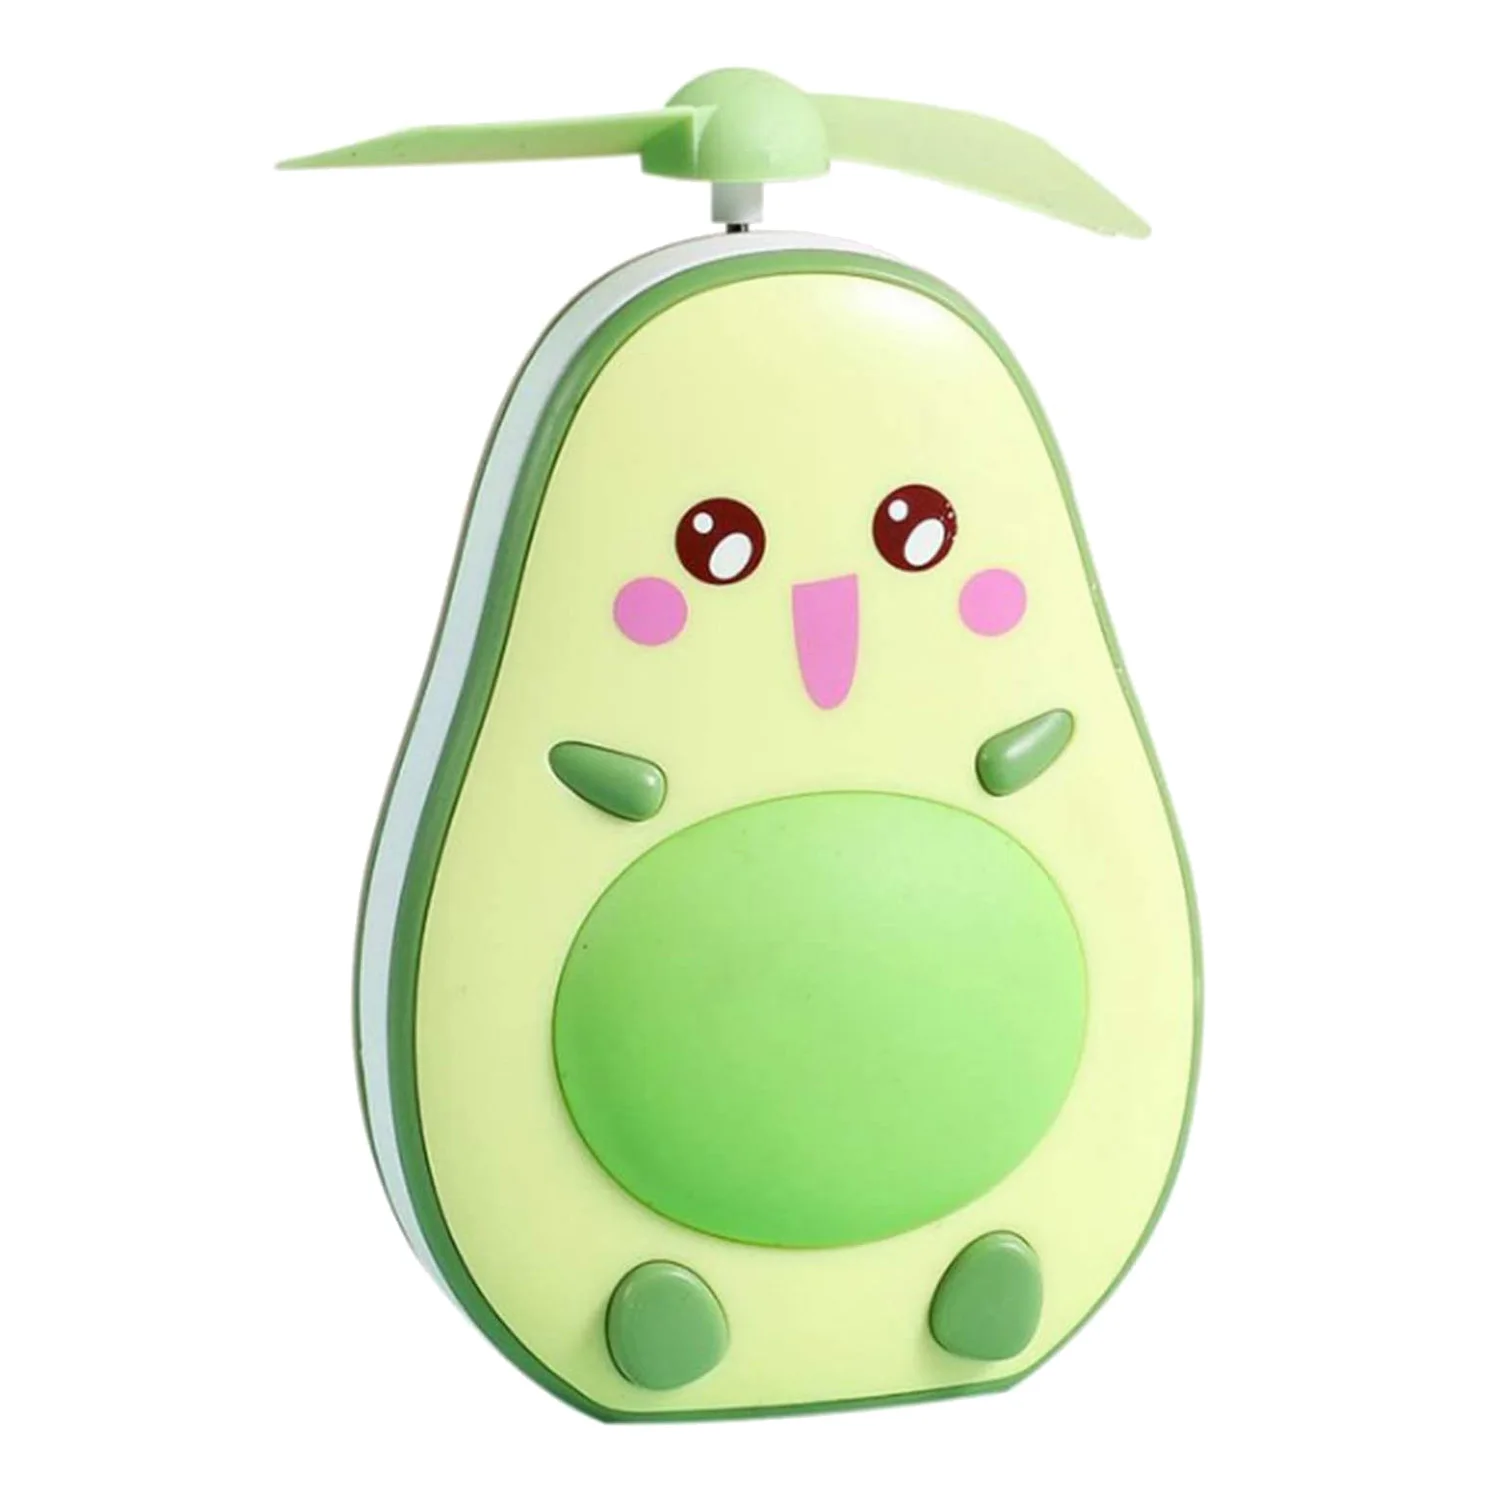 

Mini LED Makeup Mirror and Fan 2 in 1 Integrated Cute Avocado Shaped Practical Portable USB Charging Handheld Fan,Green